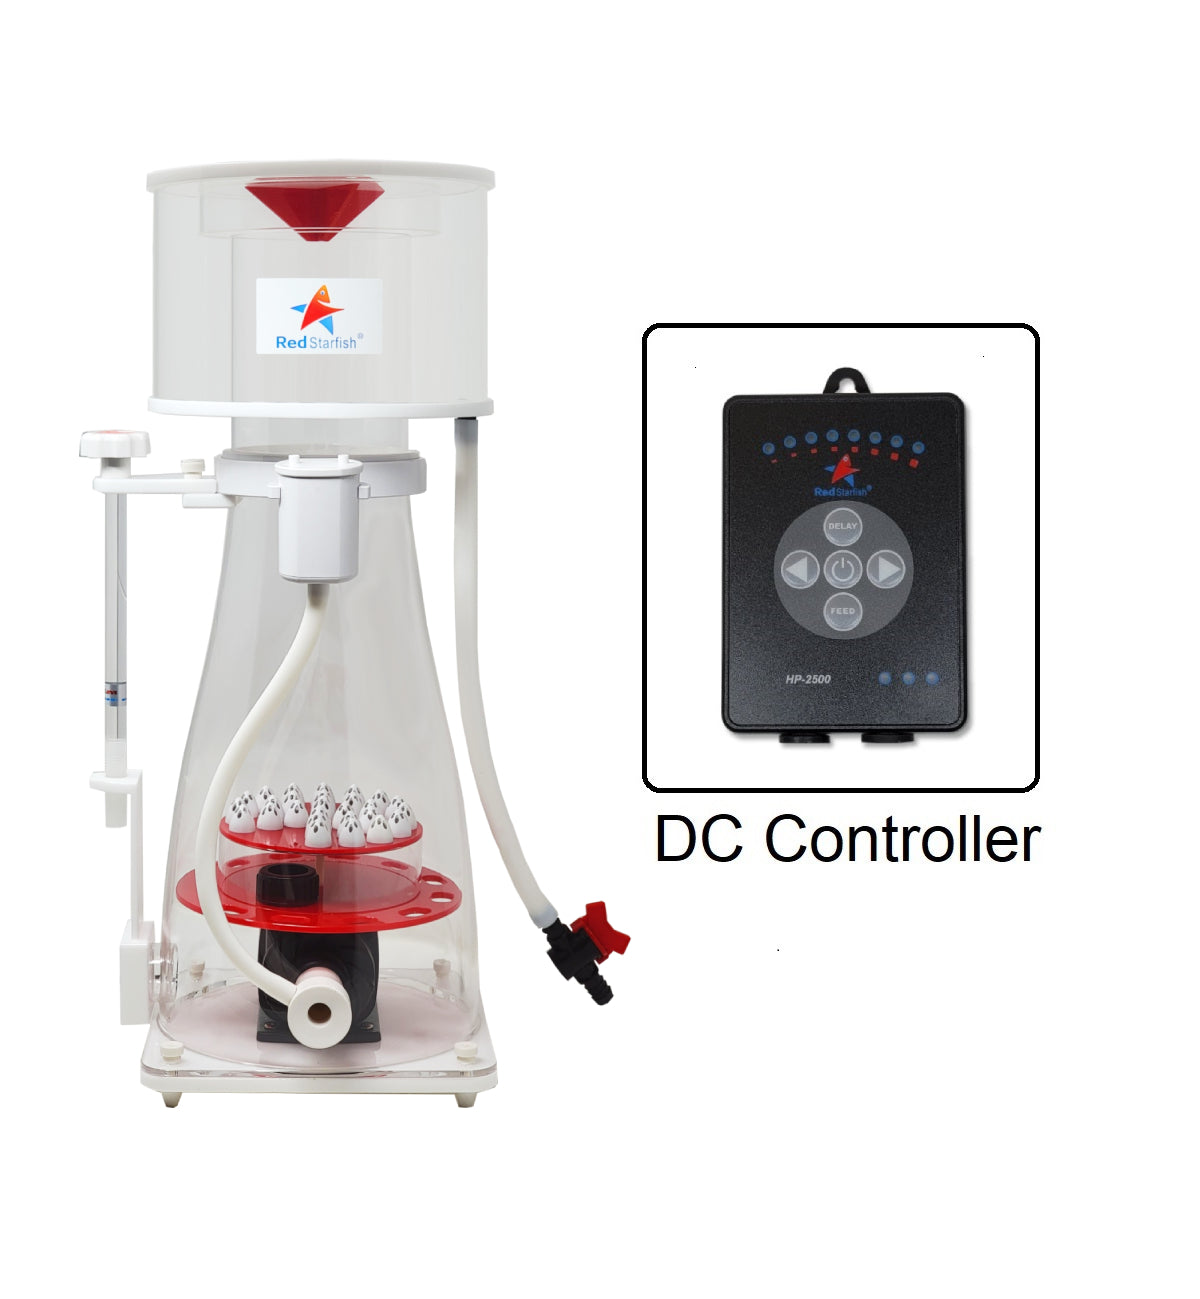 Red Star Fish RS-N230+ DC Protein Skimmer